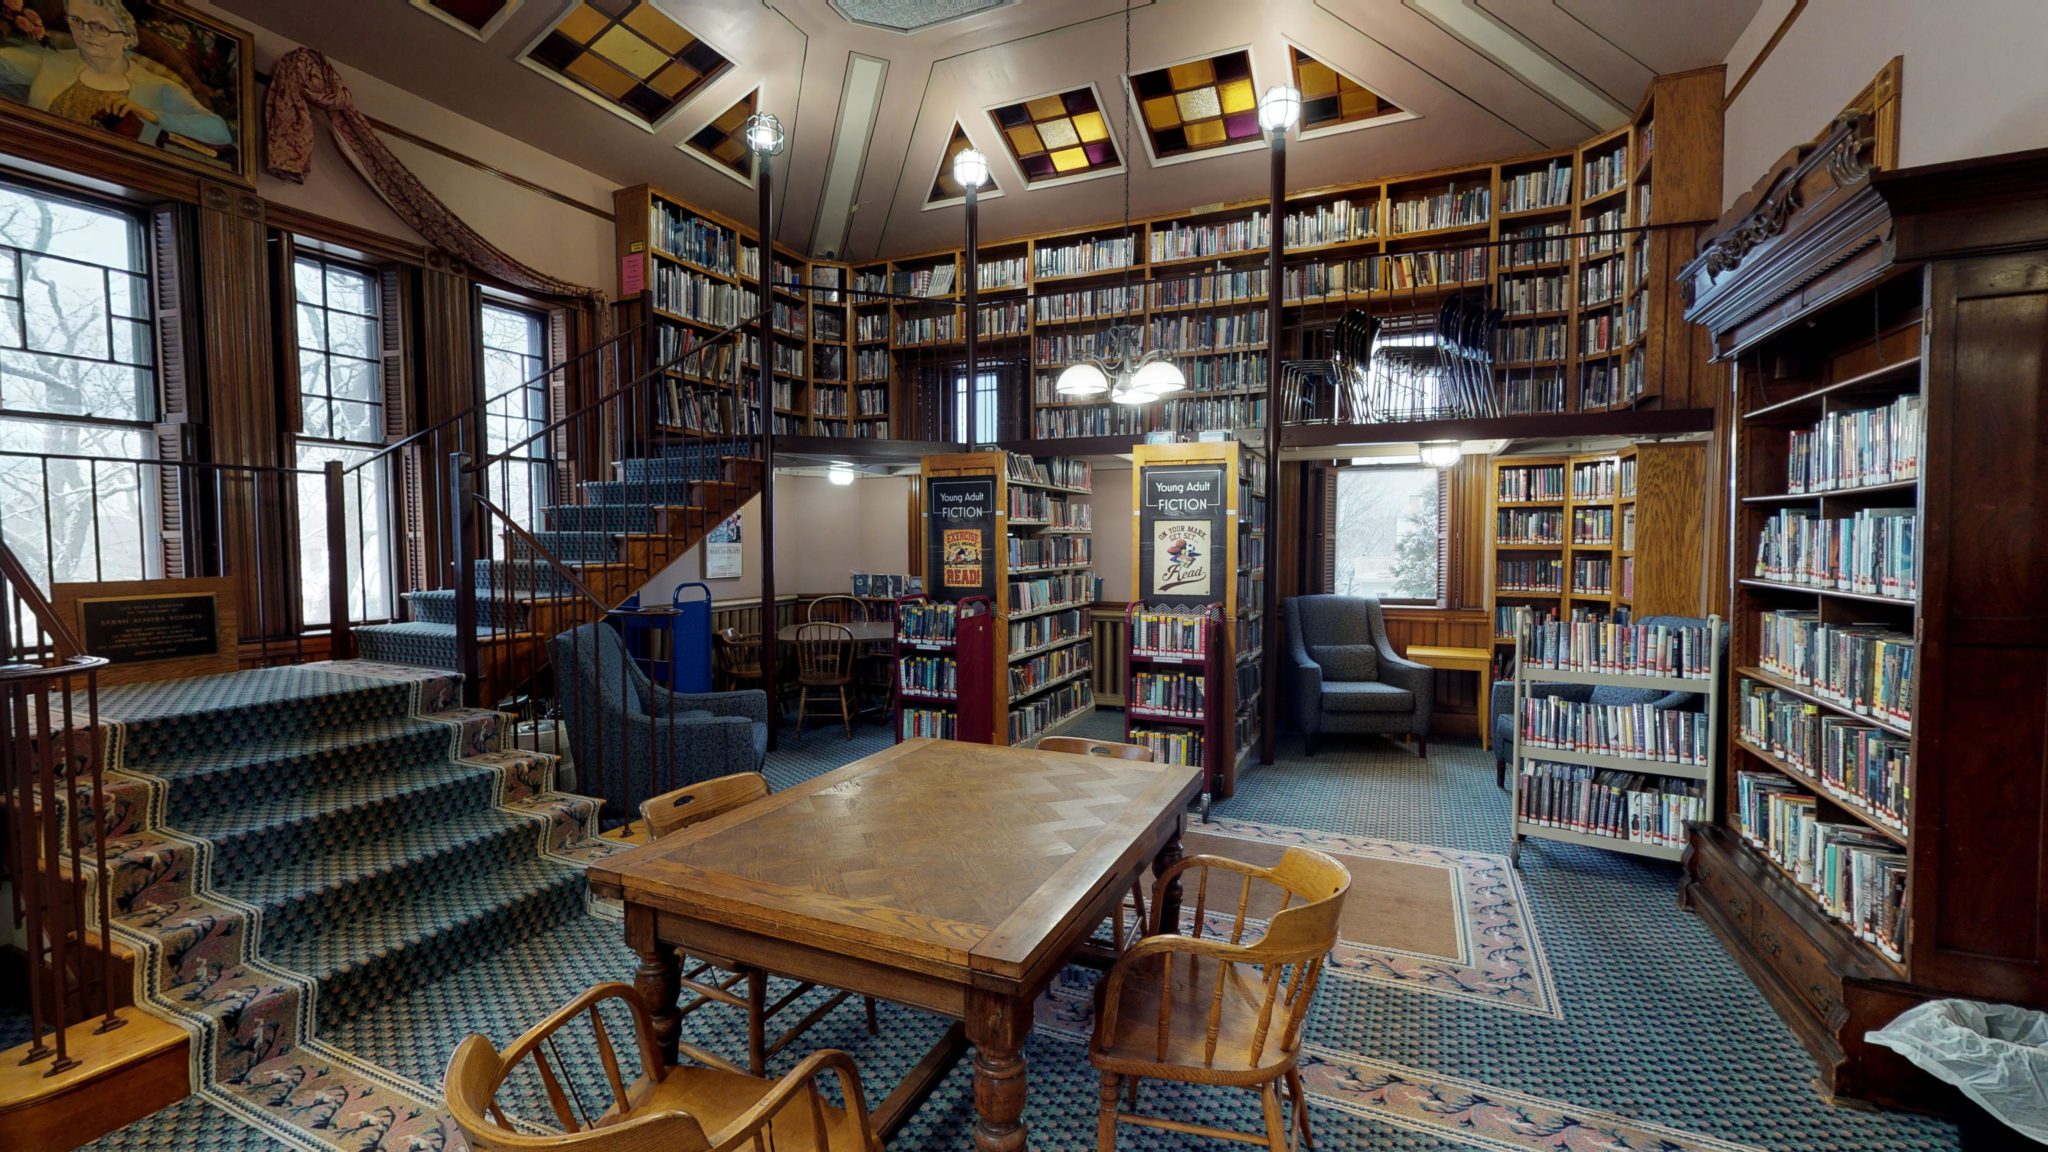 Rice-Public-Library-Kittery-Maine-01142020_111858